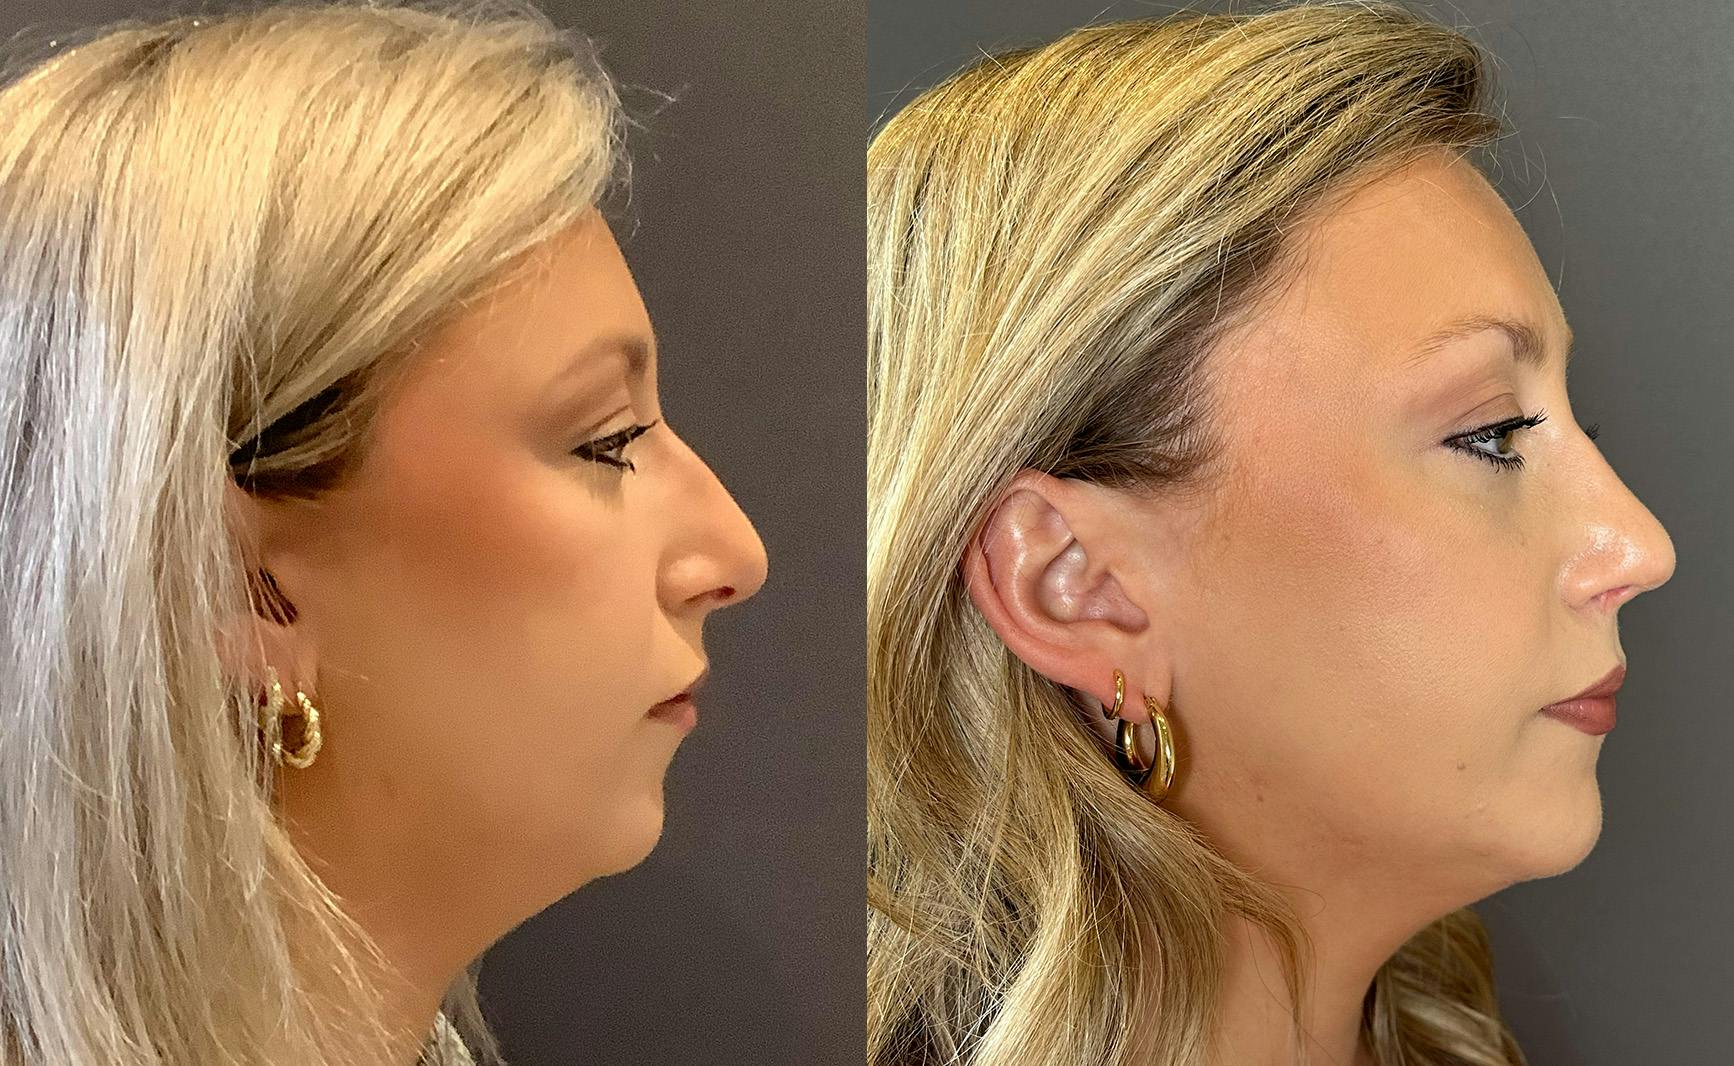 Rhinoplasty Before & After Gallery - Patient 124652 - Image 1